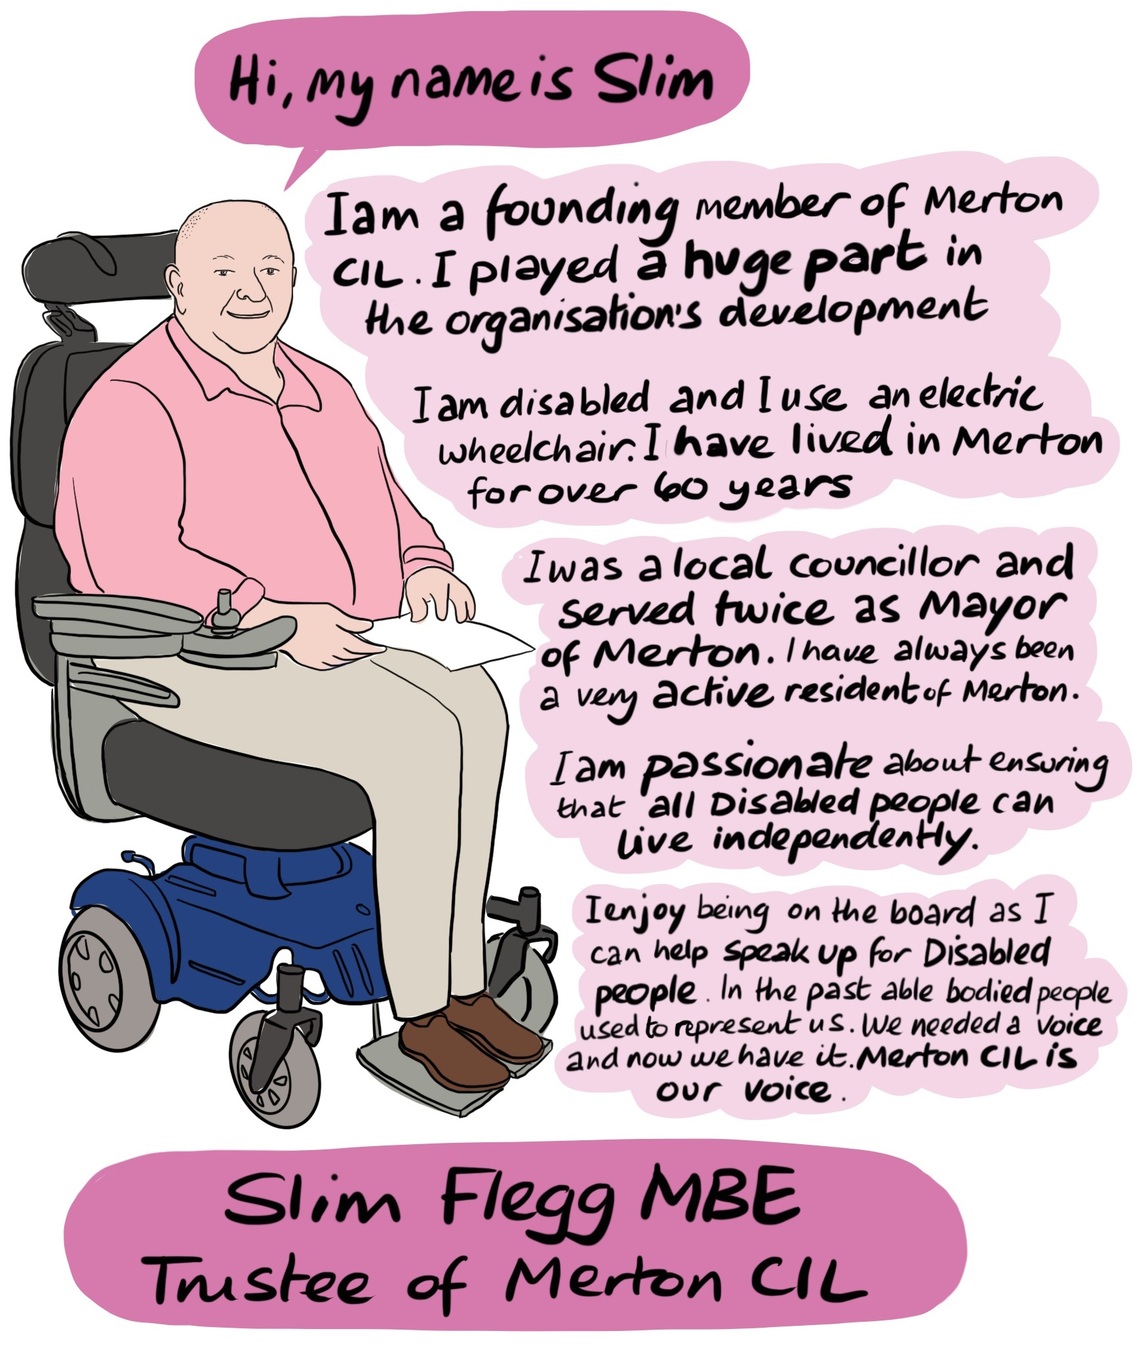 Slim - Slim was born and raised in Merton and remains an extremely active resident. Slim was a local Councillor and was the Mayor of Merton twice. He is also a founding member of Merton CIL and was key to the organisations development. Slim is very passionate about access issues and ensuring that Deaf and Disabled people can live independent lives. He attends the Direct Payments forum at Merton Council on behalf of Merton CIL and its members. 